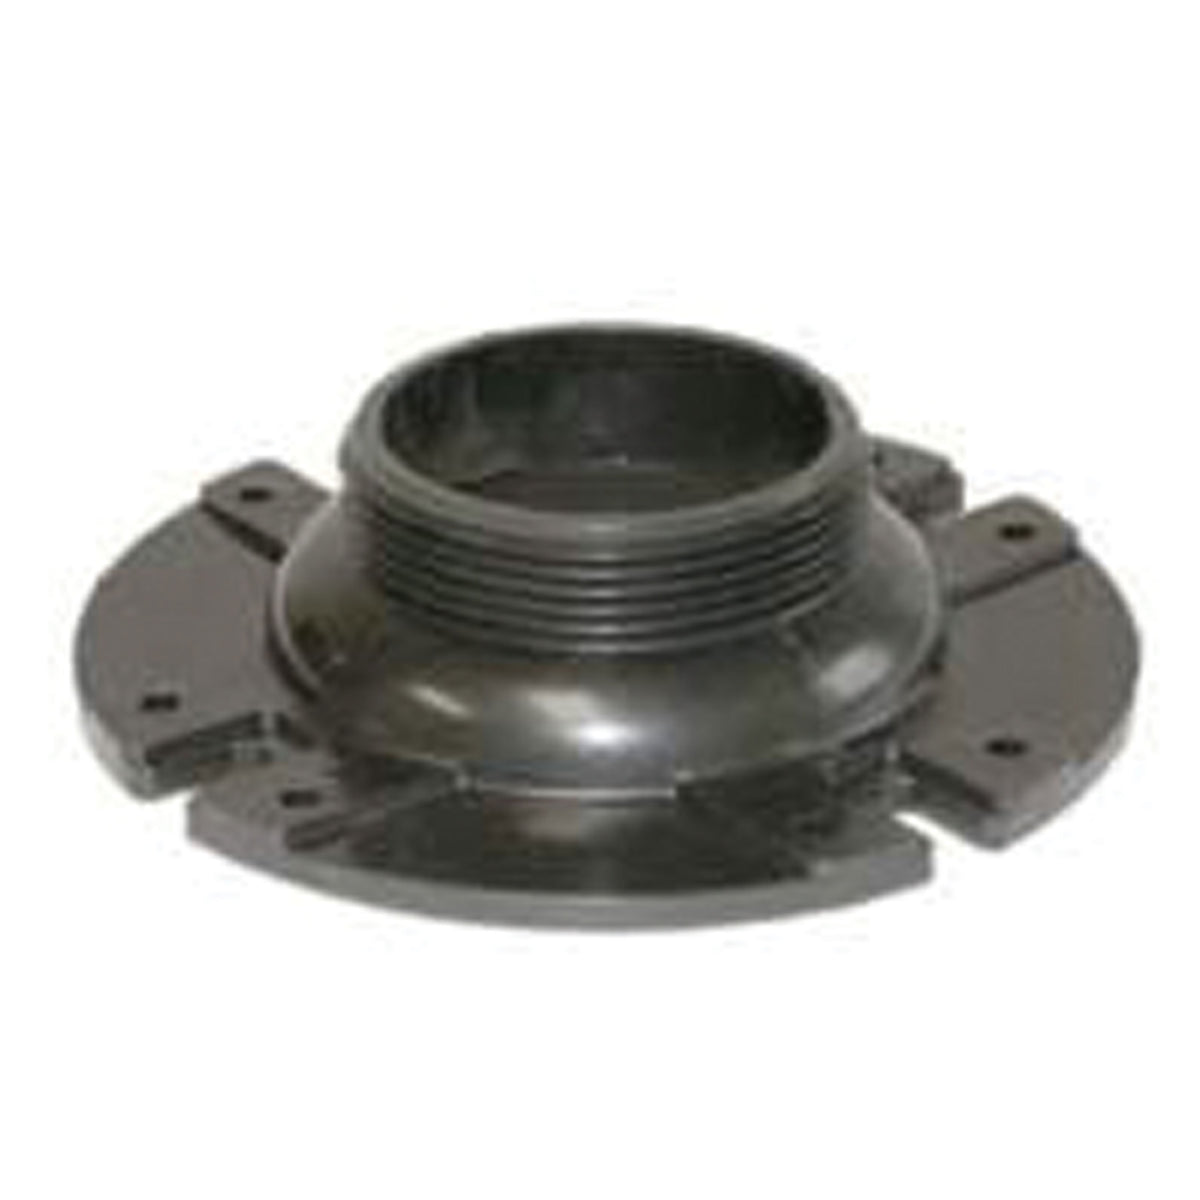 Icon 00425 Holding Tank Fitting - 3" ID, 7" OD Flange